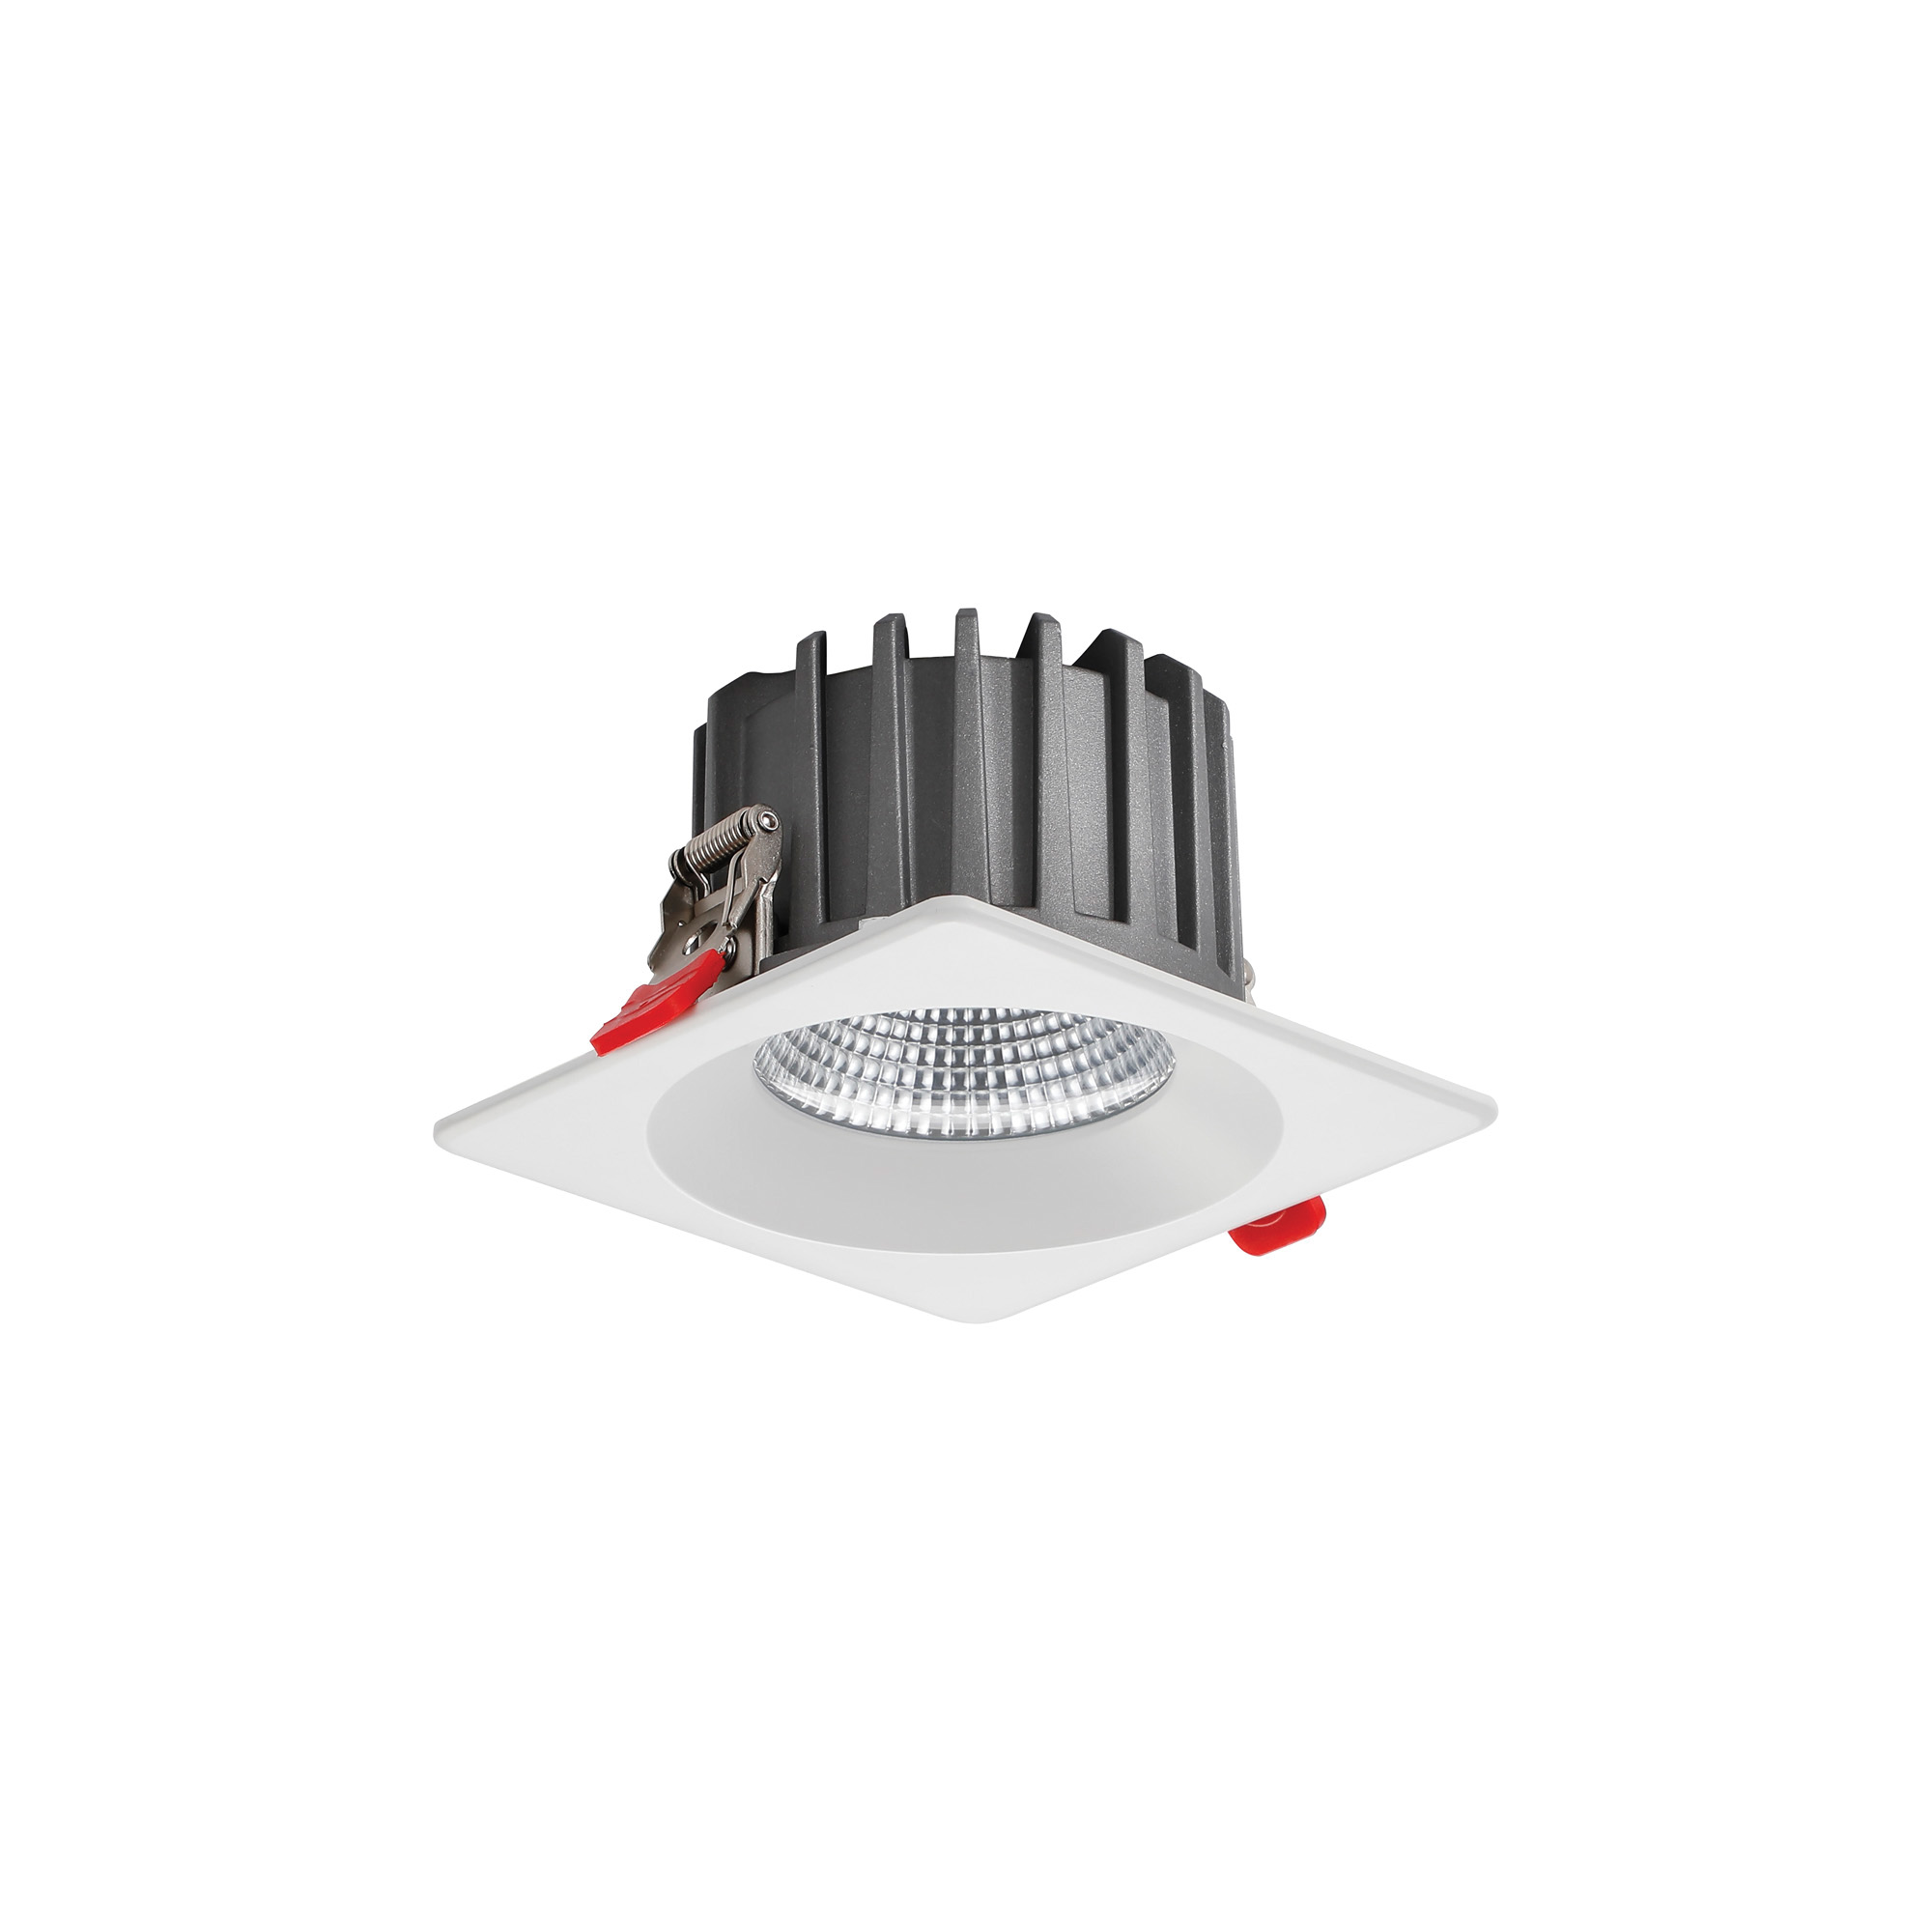 DL200071  Bionic 15; 15W; 350mA; White Deep Square Recessed Downlight; 1178lm ;Cut Out 120mm; 40° ; 4000K; IP44; DRIVER INC.; 5yrs Warranty.